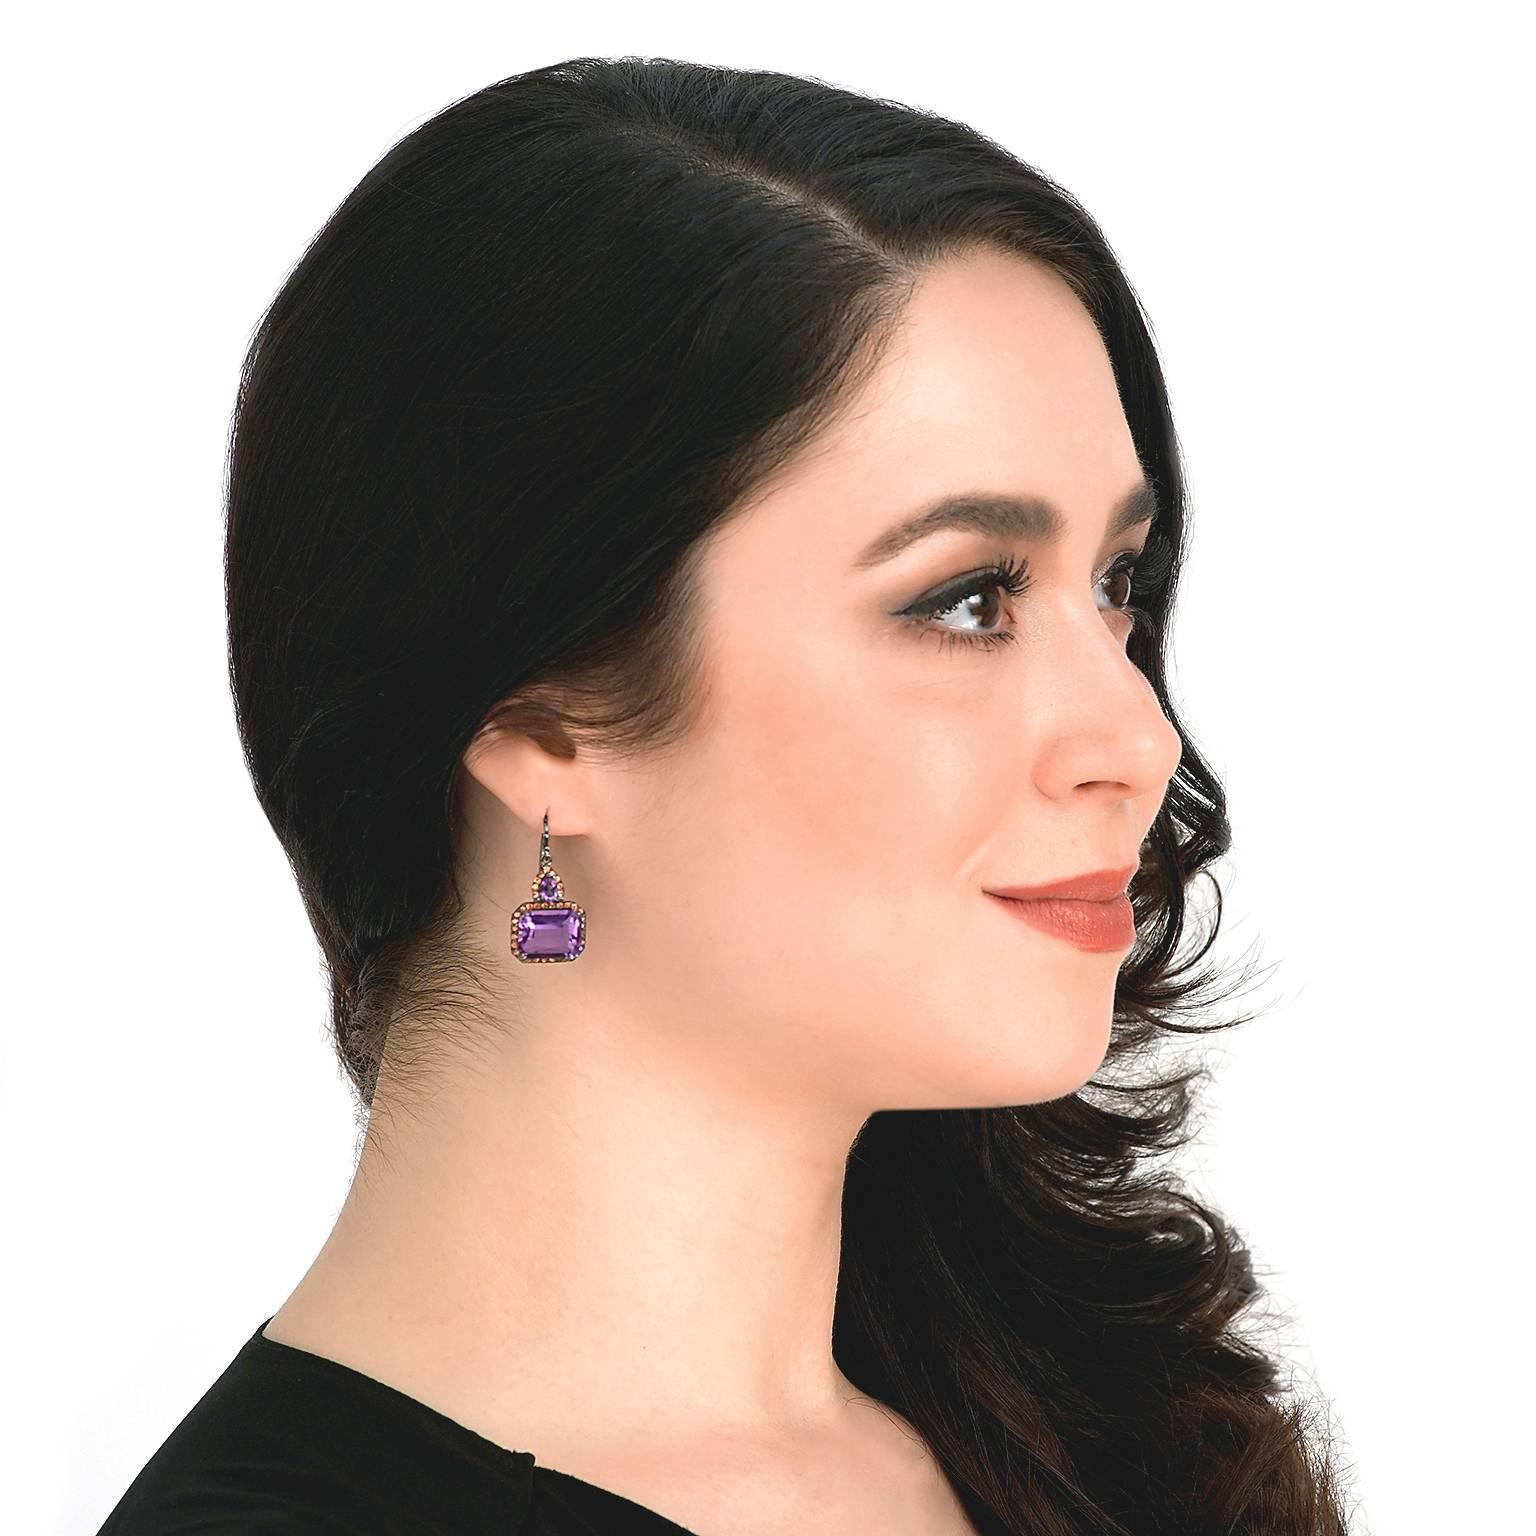 Circa 2000s, 18k, by A & Furst, American.  Blending modern design, classic elegance, and a unique color palette, these earrings have a look that pops. Vibrant amethysts framed by vivid orange sapphires are juxtaposed in blackened eighteen-karat gold